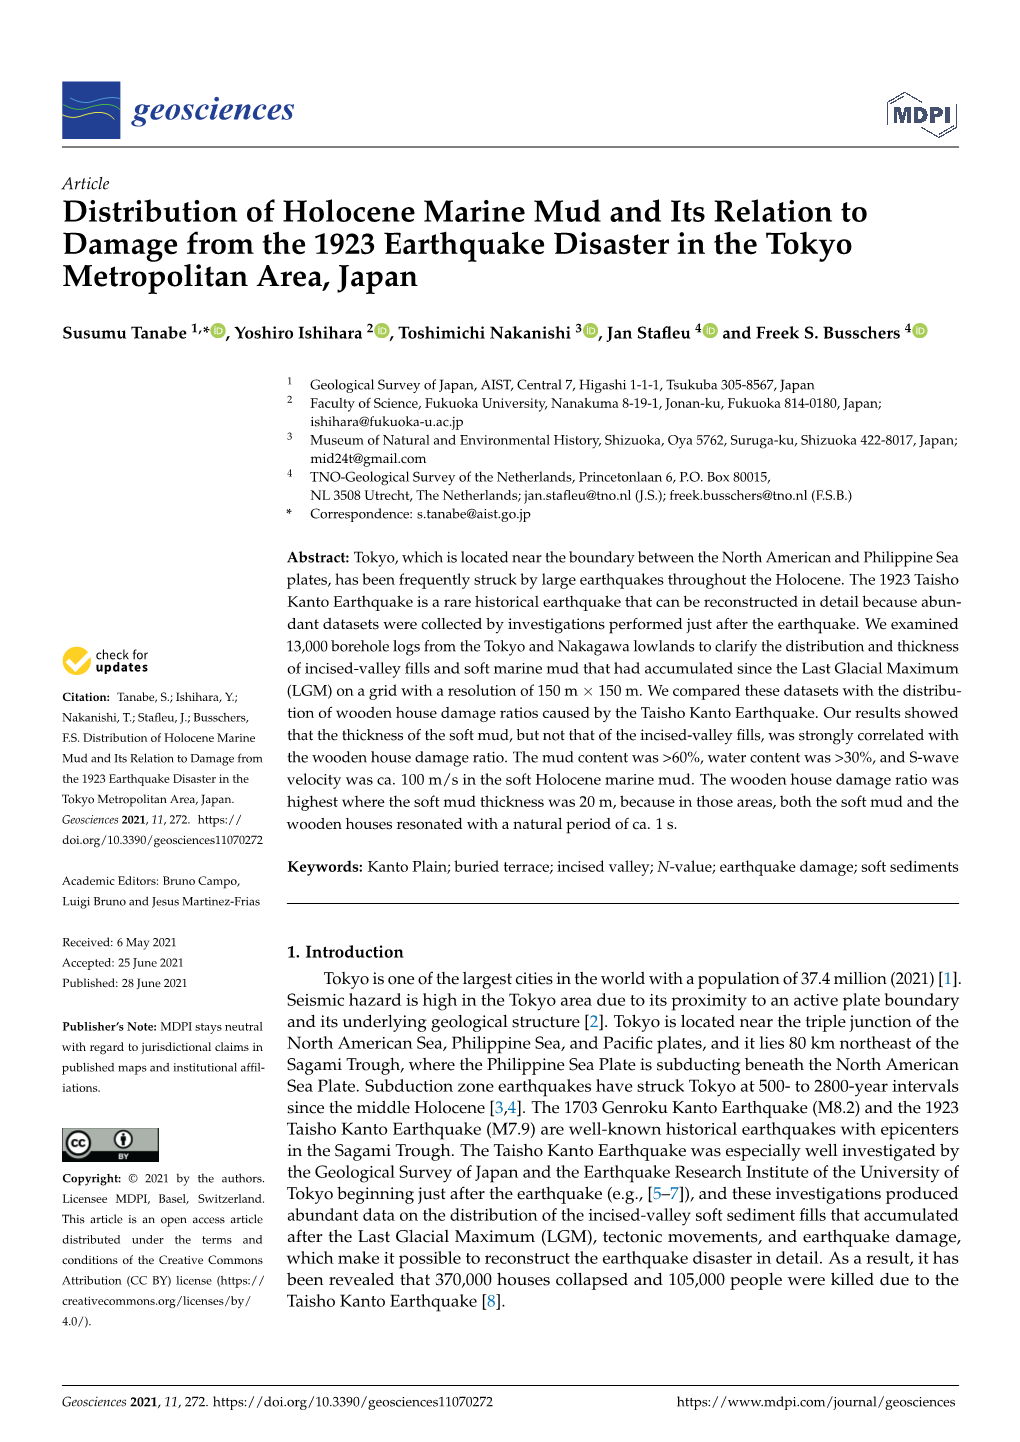 Distribution of Holocene Marine Mud and Its Relation to Damage from the 1923 Earthquake Disaster in the Tokyo Metropolitan Area, Japan